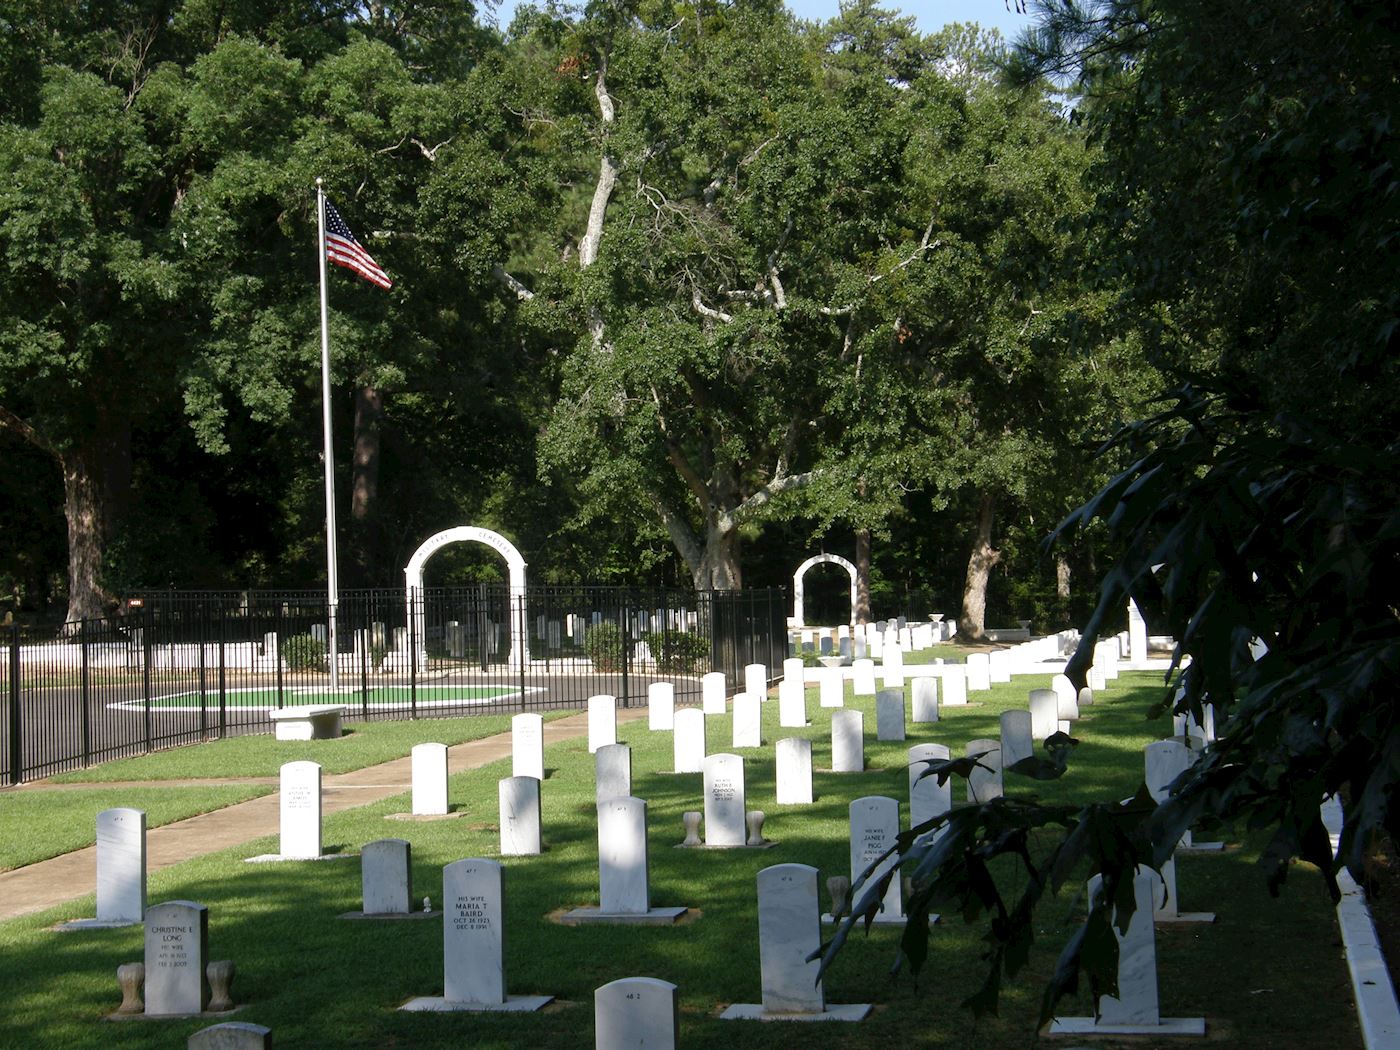 The Fort McClellan, Ala., Military Cemetery is on Goode Road in a quiet, peaceful location that is easily accessible to the public.